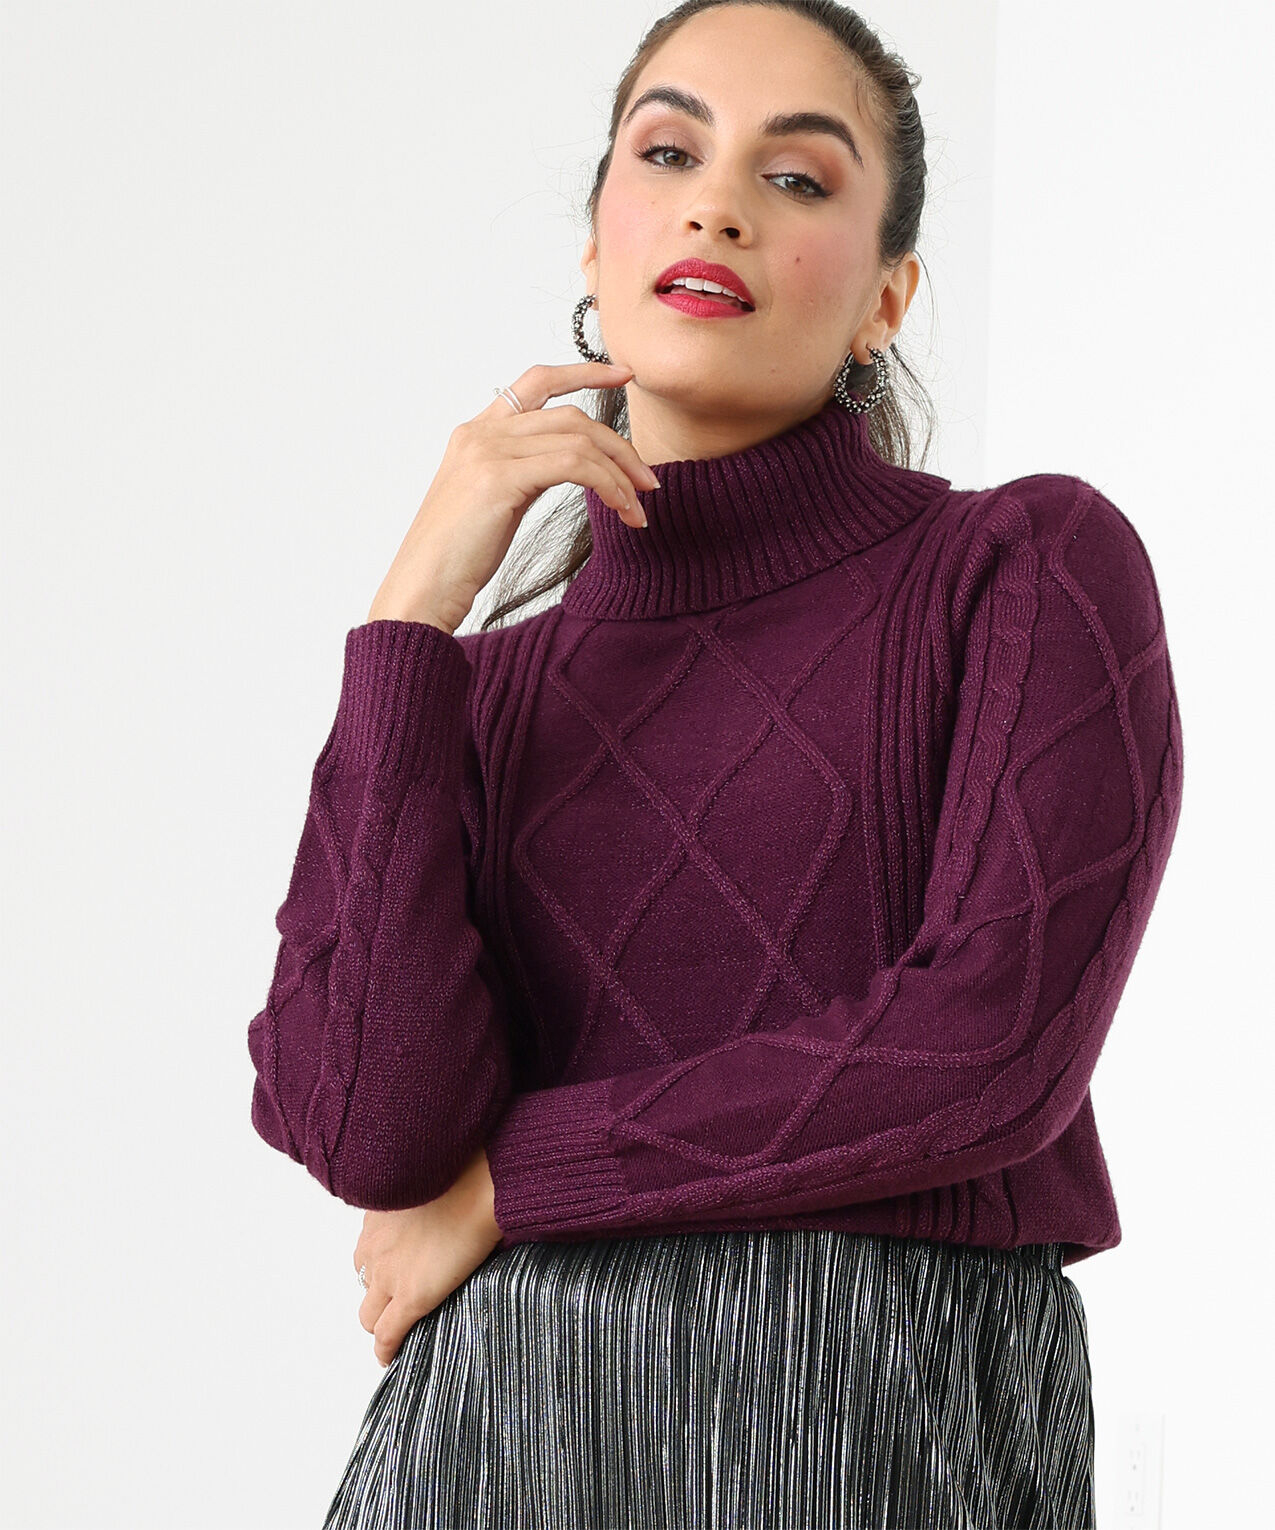 Shimmery Cable Knit Turtleneck Sweater